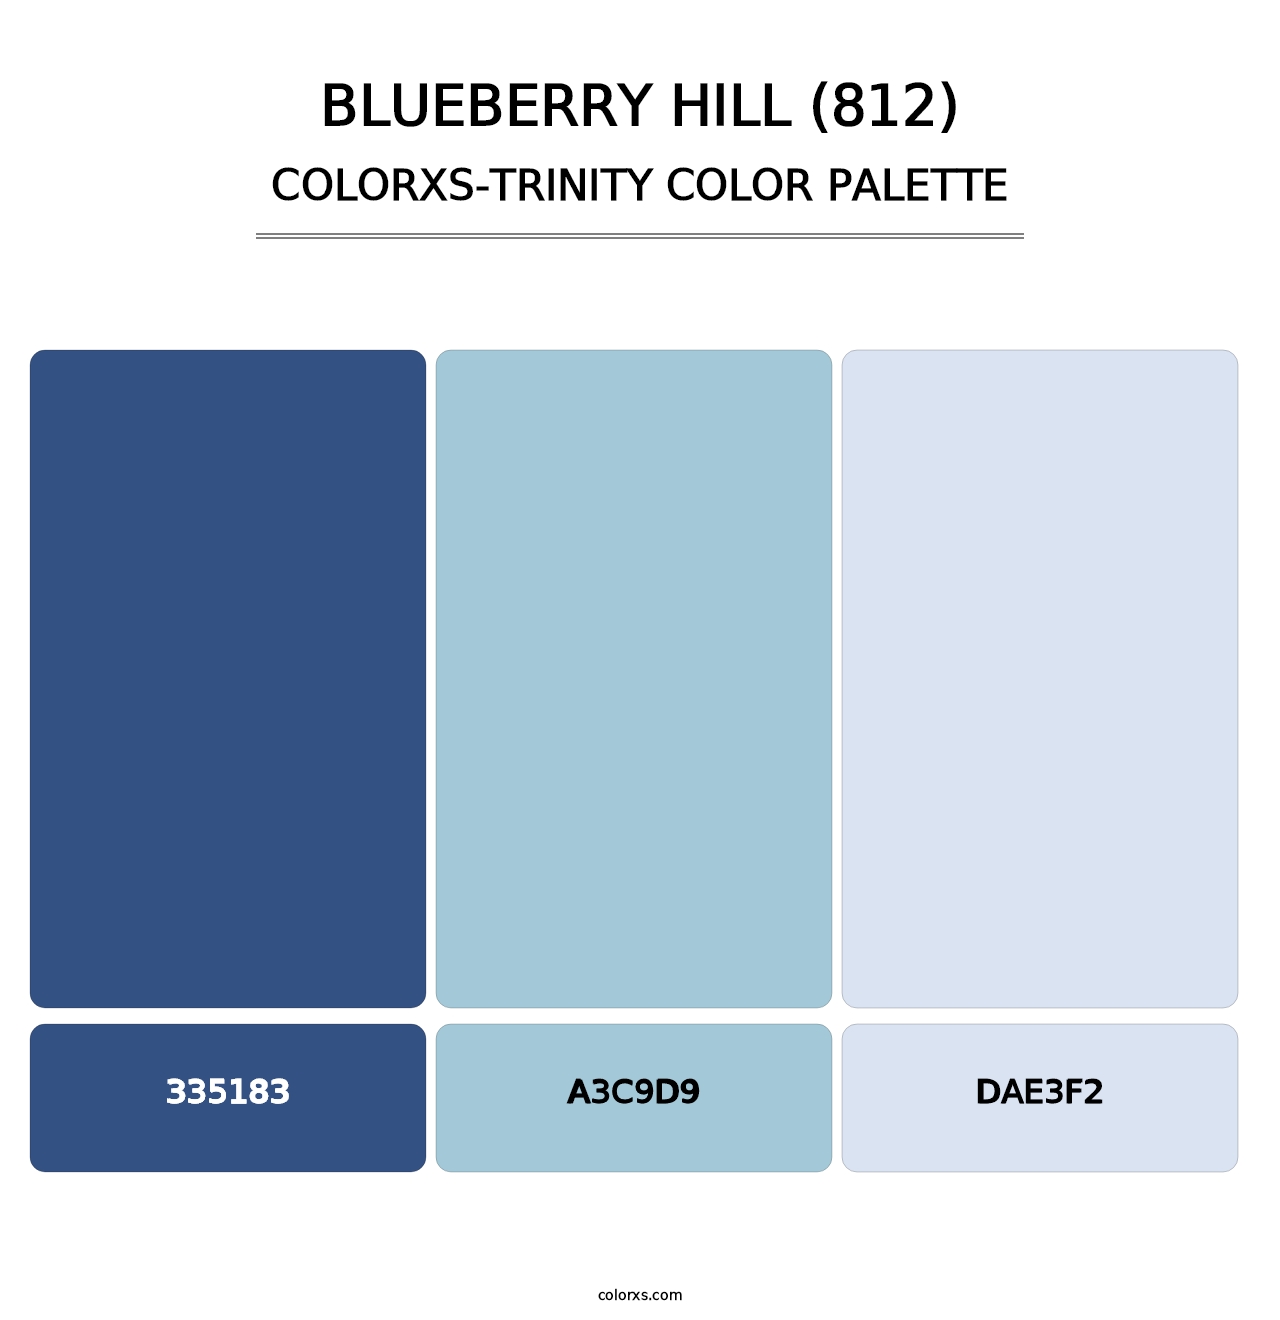 Blueberry Hill (812) - Colorxs Trinity Palette